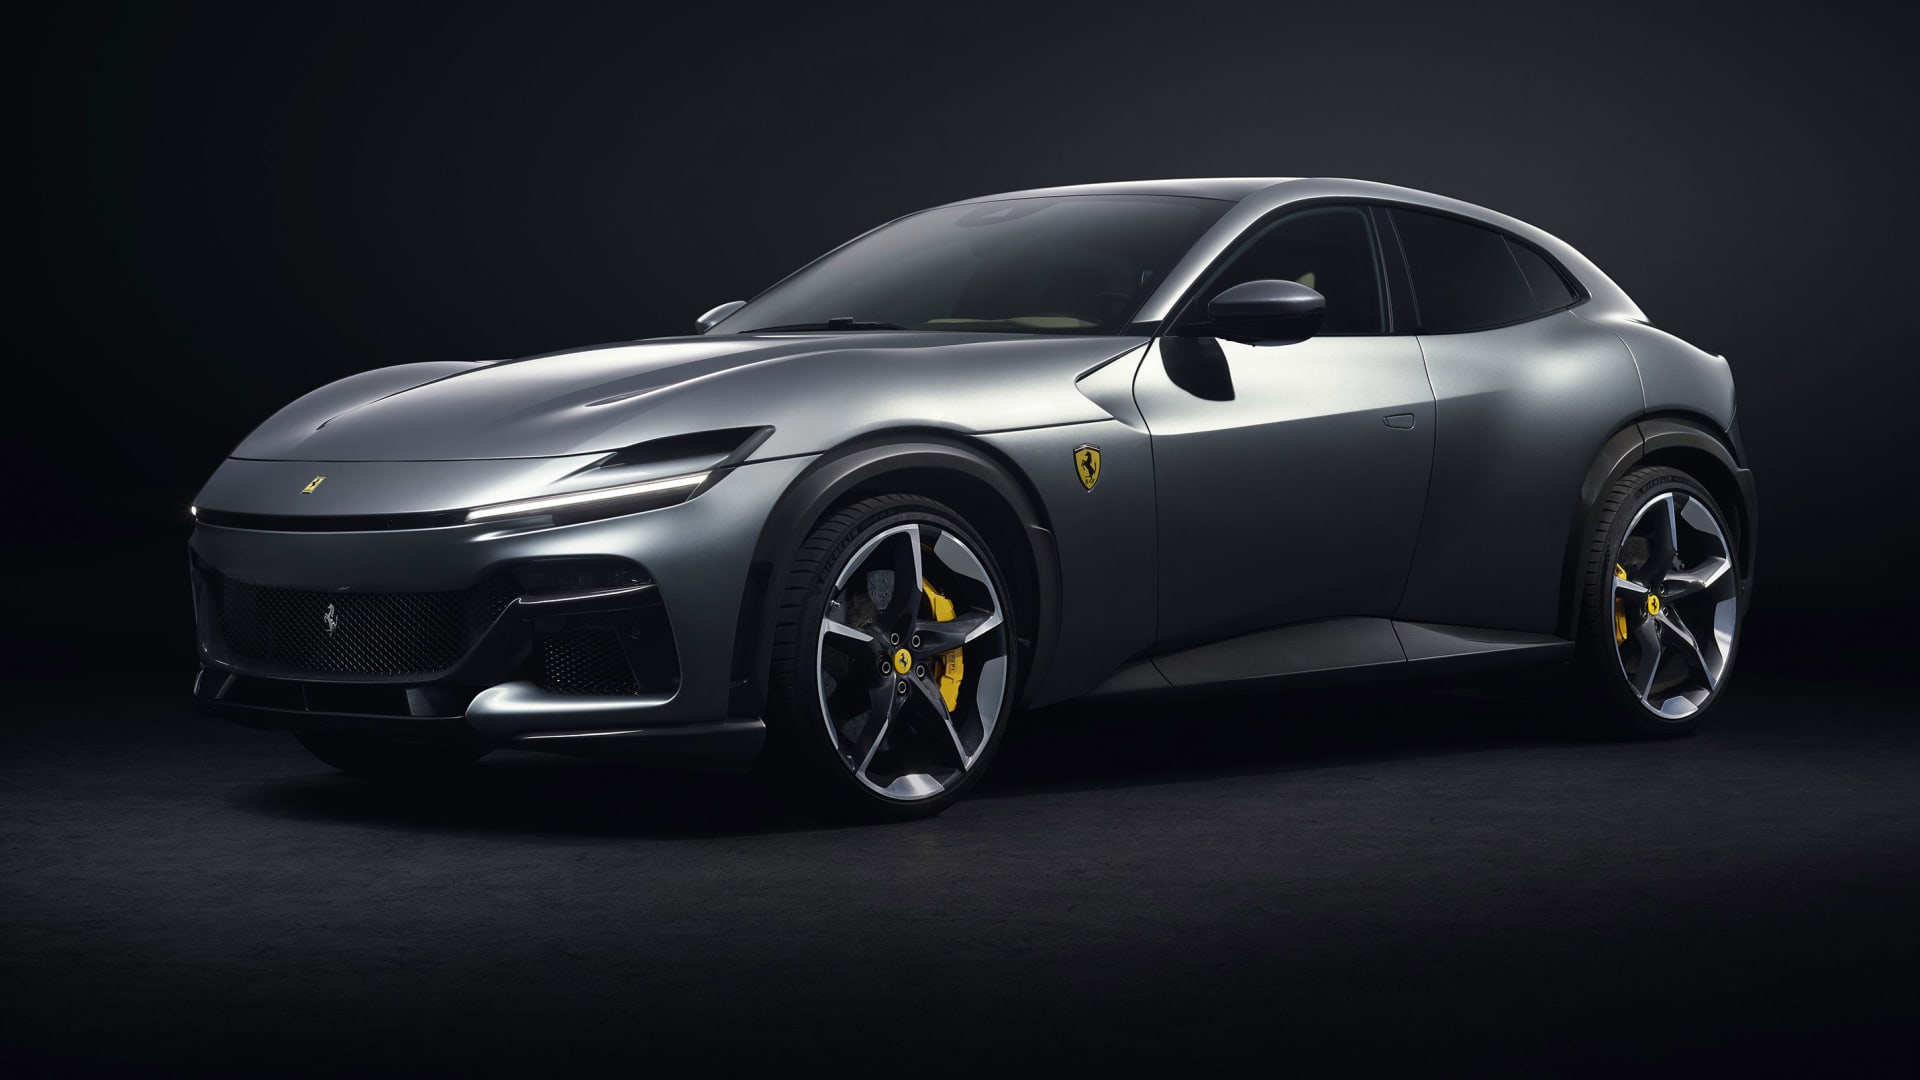 Ferrari just revealed its first-ever 4-door model, a high-riding and powerful sports car called the Purosangue